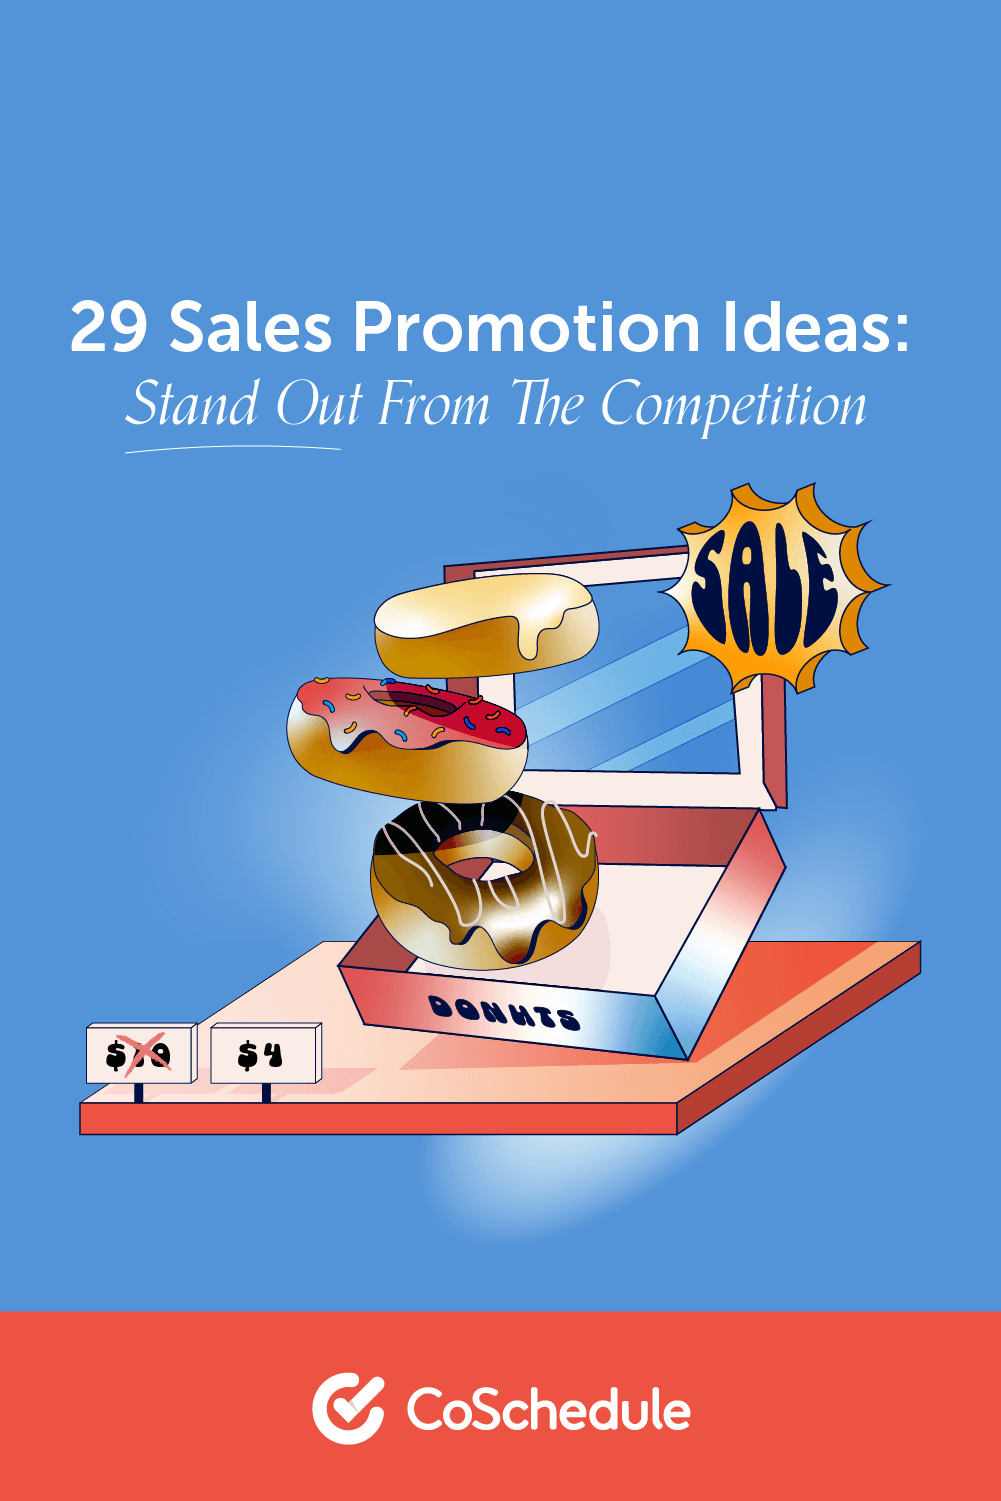 Donut sales promotion graphic